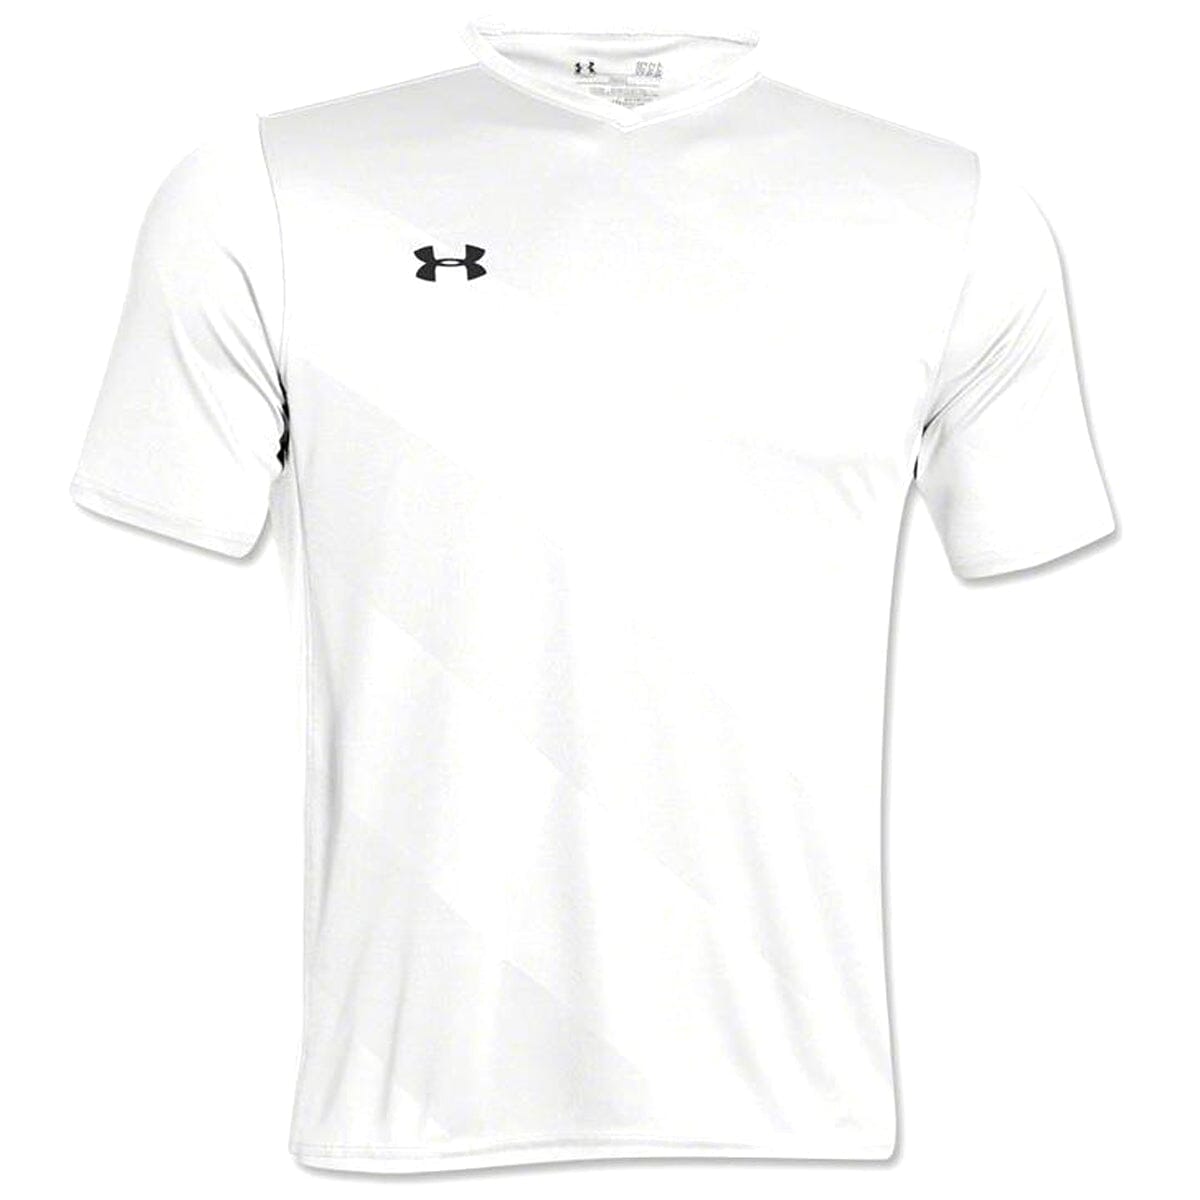 Under Armour Fixture Youth Soccer Jersey - White Jersey Under Armour Youth Small White 